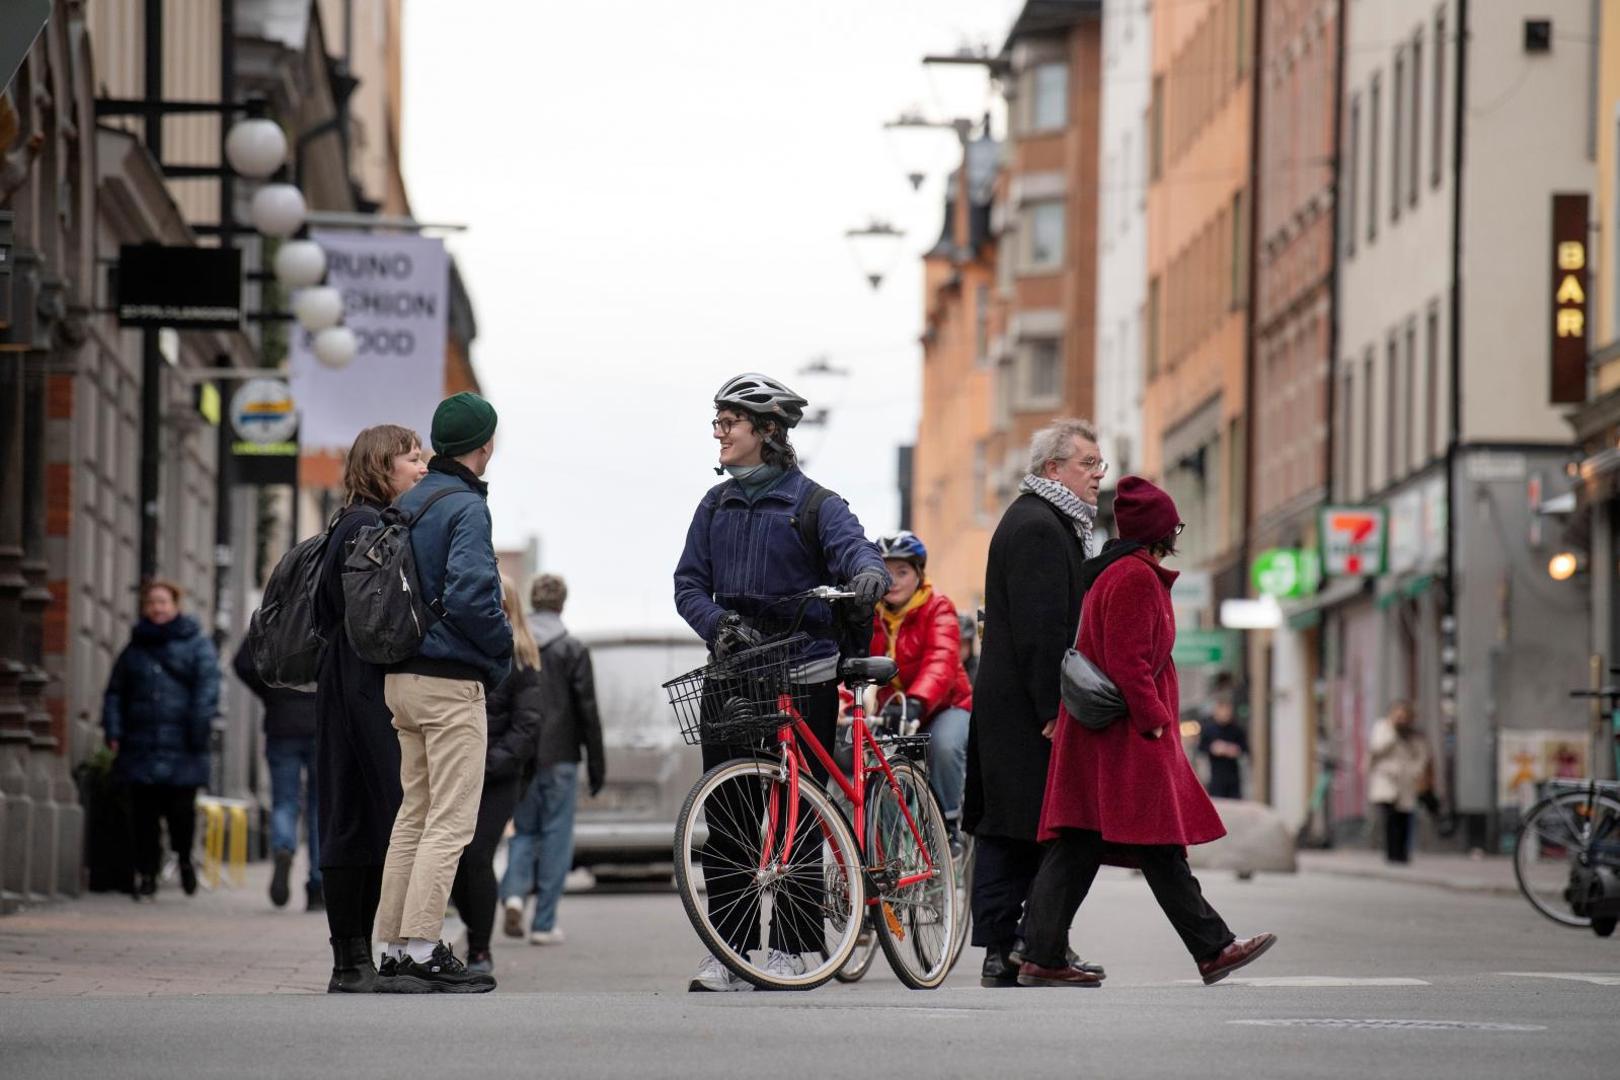 The spread of the coronavirus disease (COVID-19) in Stockholm People talk on a street in the Sodermalm district, as the spread of the coronavirus disease  continues (COVID-19) in Stockholm, Sweden April 1, 2020. TT News Agency/Jessica Gow  via REUTERS   ATTENTION EDITORS - THIS IMAGE WAS PROVIDED BY A THIRD PARTY. SWEDEN OUT. NO COMMERCIAL OR EDITORIAL SALES IN SWE TT NEWS AGENCY